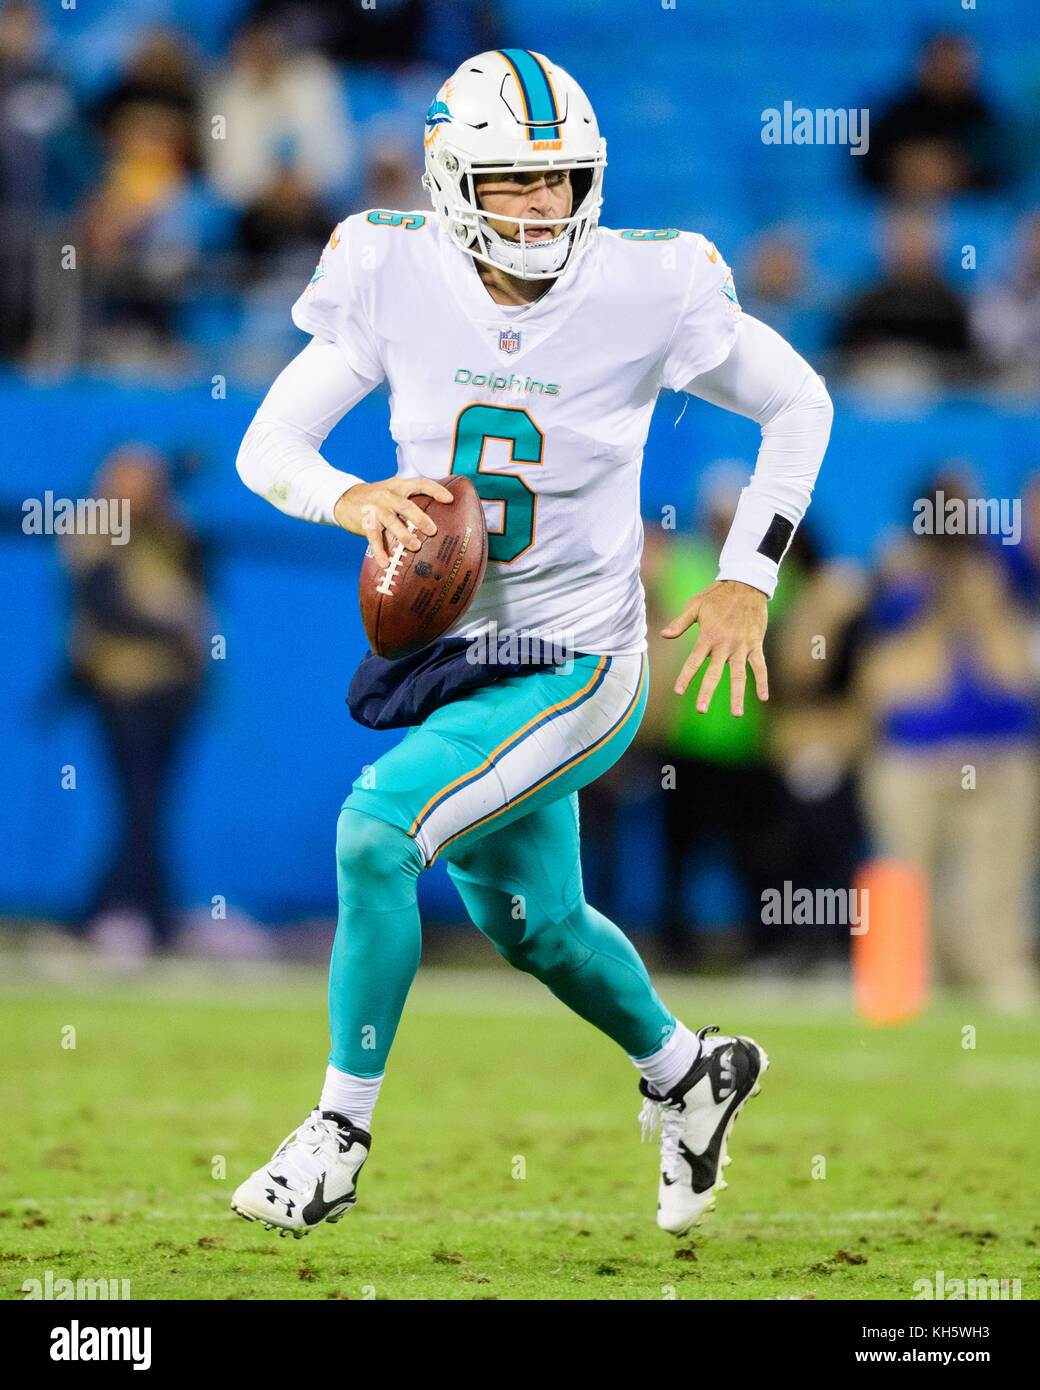 Miami Dolphins quarterback Jay Cutler (6) during the NFL football game  between the Miami Dolphins and the Carolina Panthers on Monday November 13,  2017 in Charlotte, NC. Jacob Kupferman/CSM13th November, 2017 Stock Photo -  Alamy